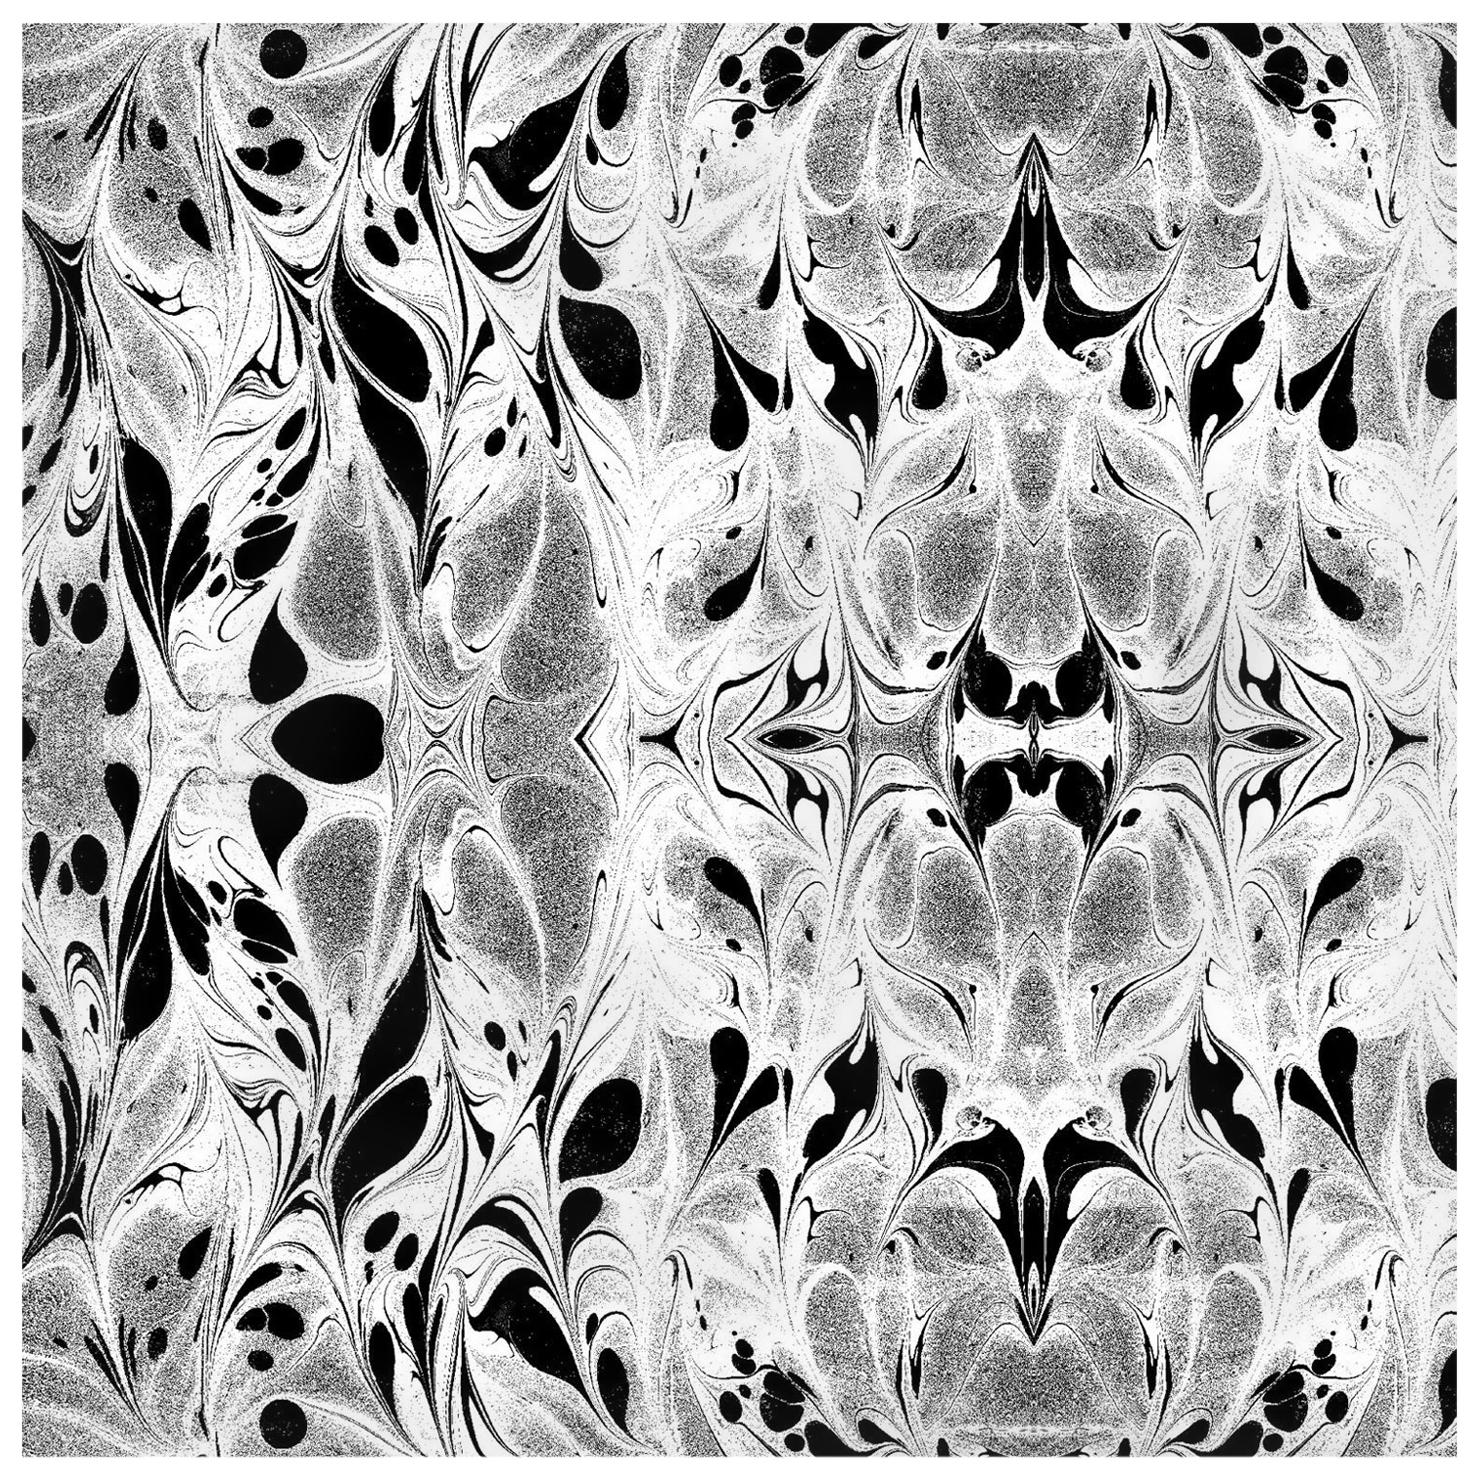 "Fluid" Marbleized Pattern in Black and White Color-Way, on Smooth Paper For Sale